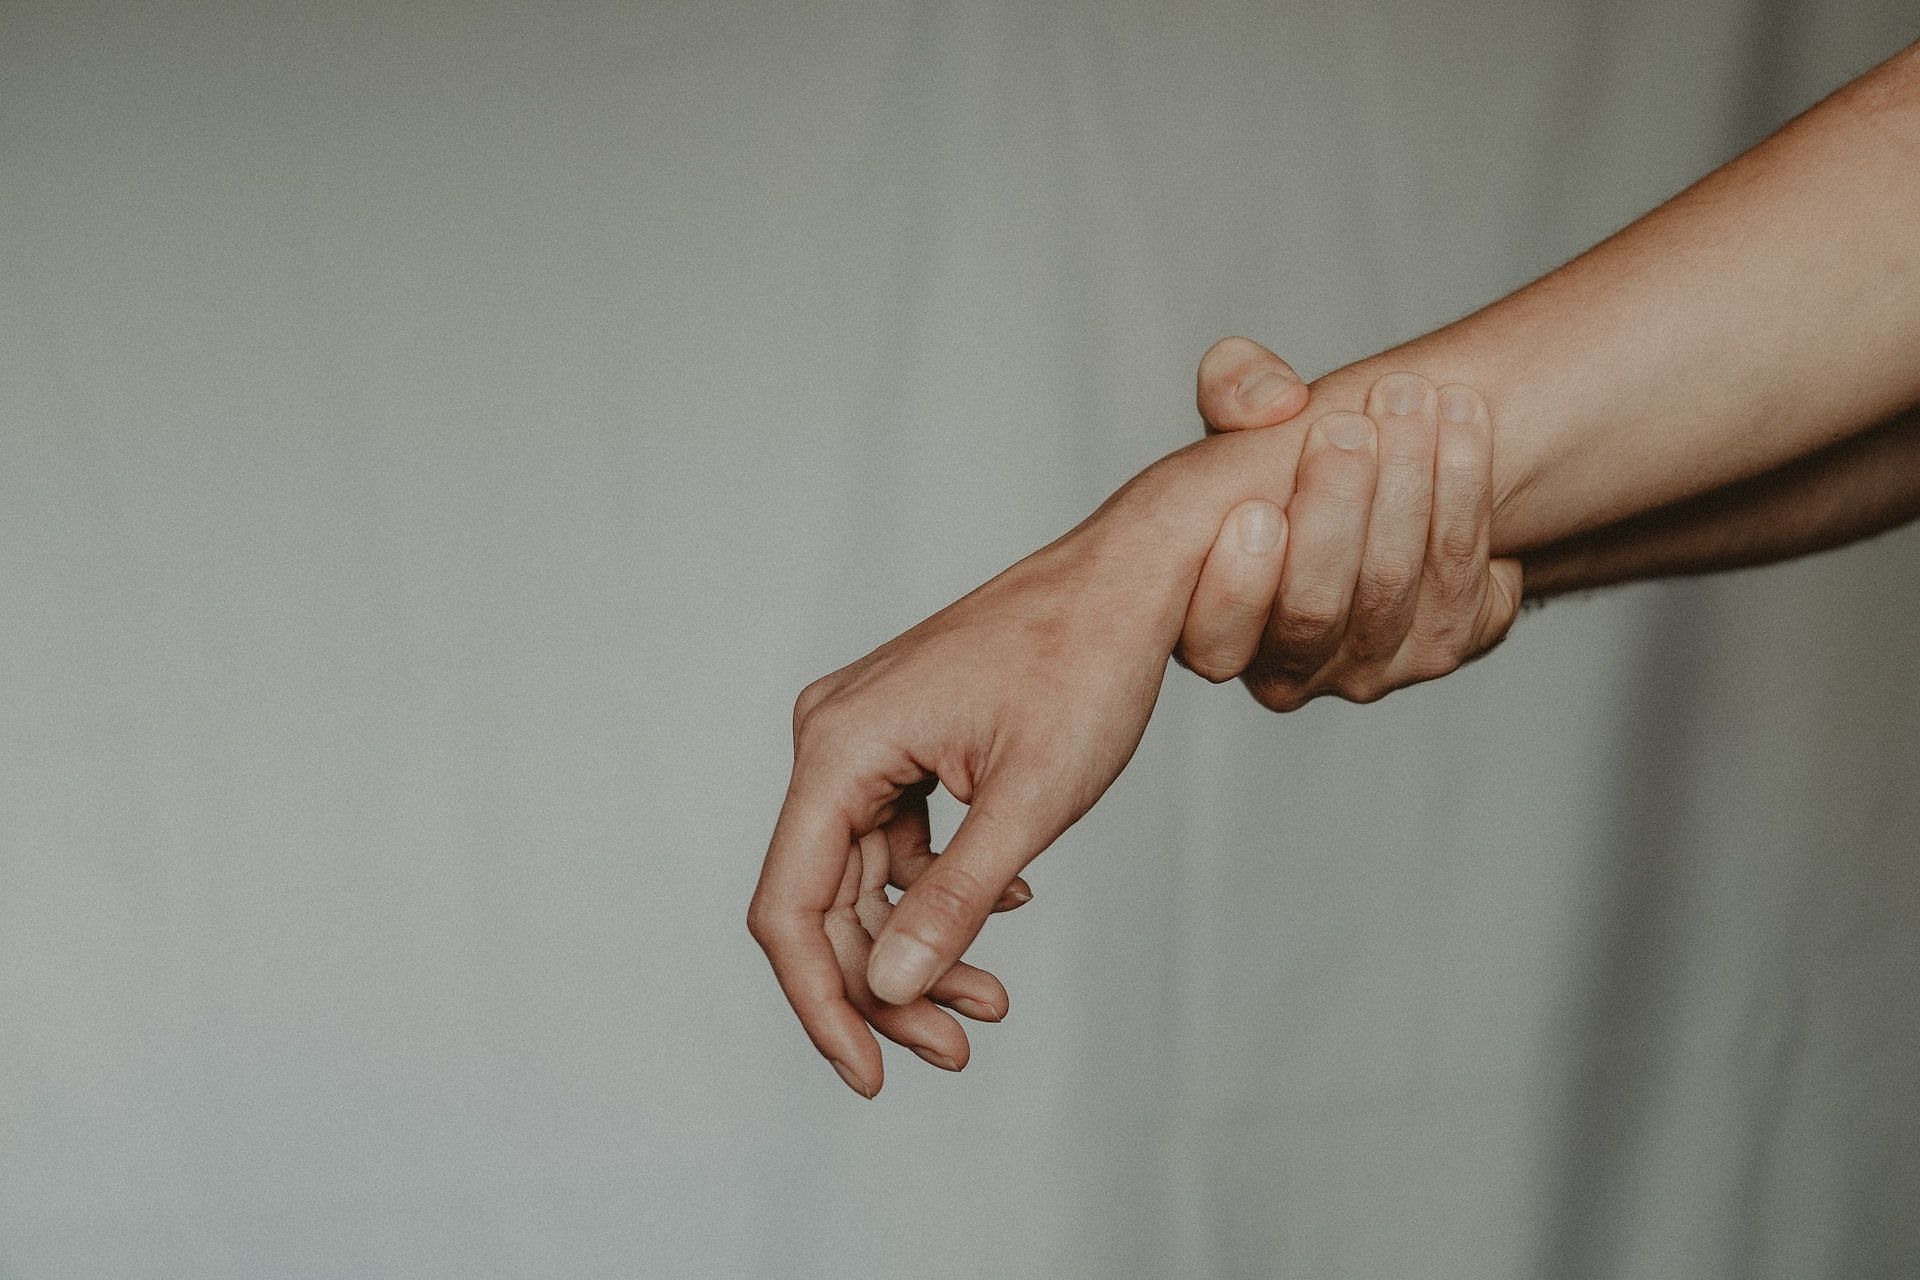 Symptoms of trigger finger can include stiffness. (Photo via Pexels/Anete Lusina)